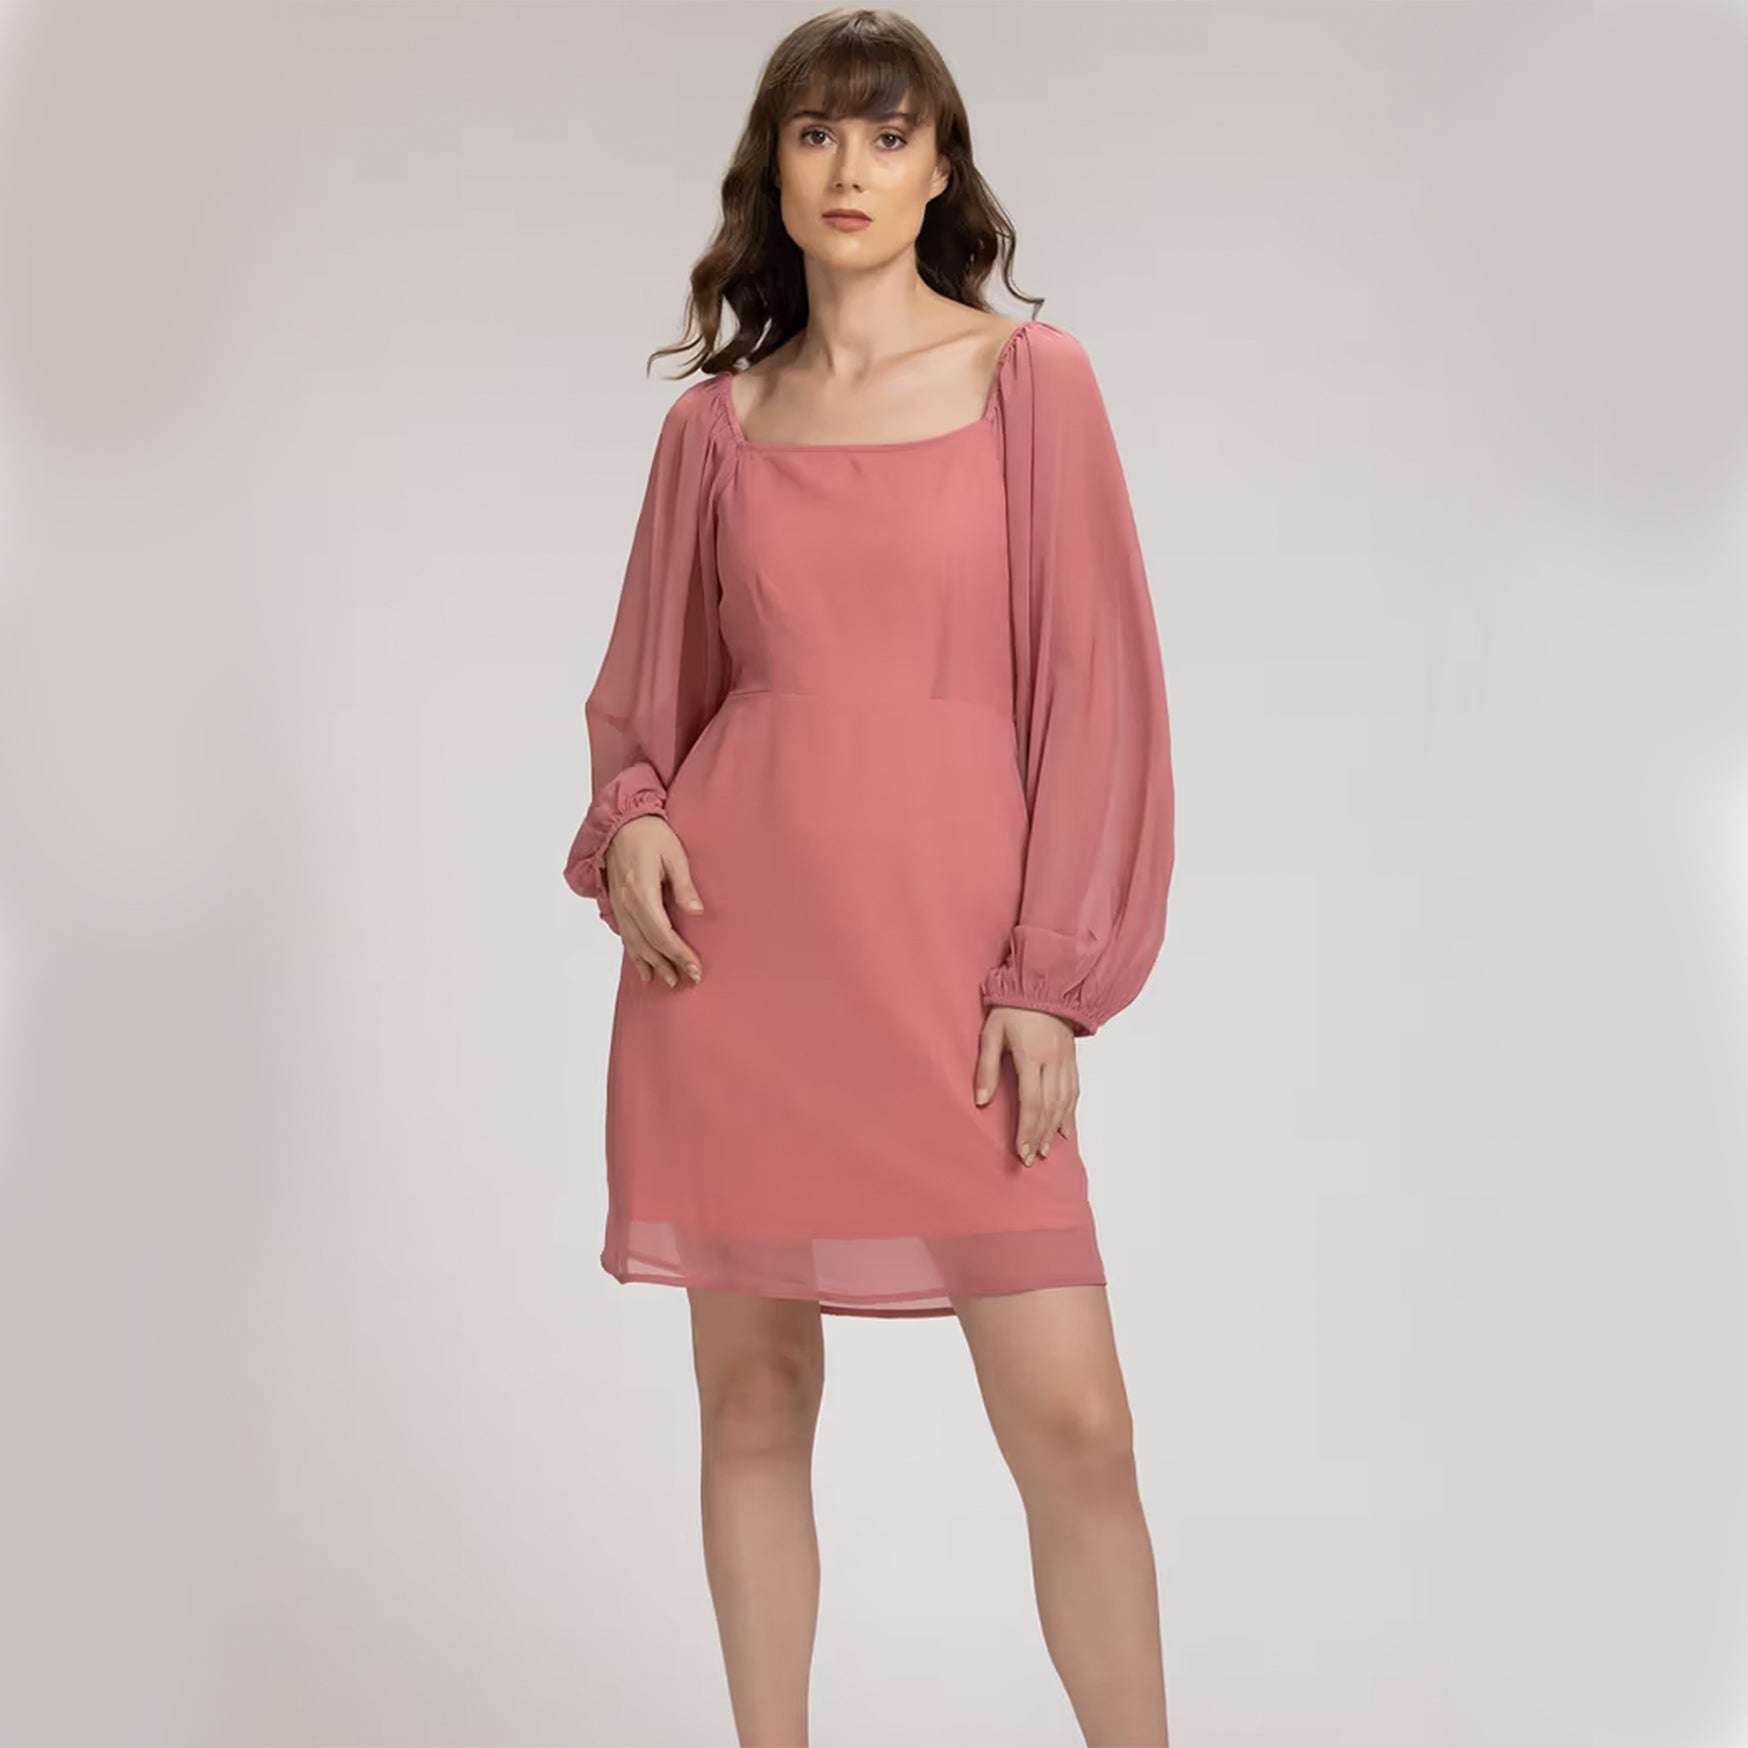 SHAYE Pink Fit and Flare Dress (M)